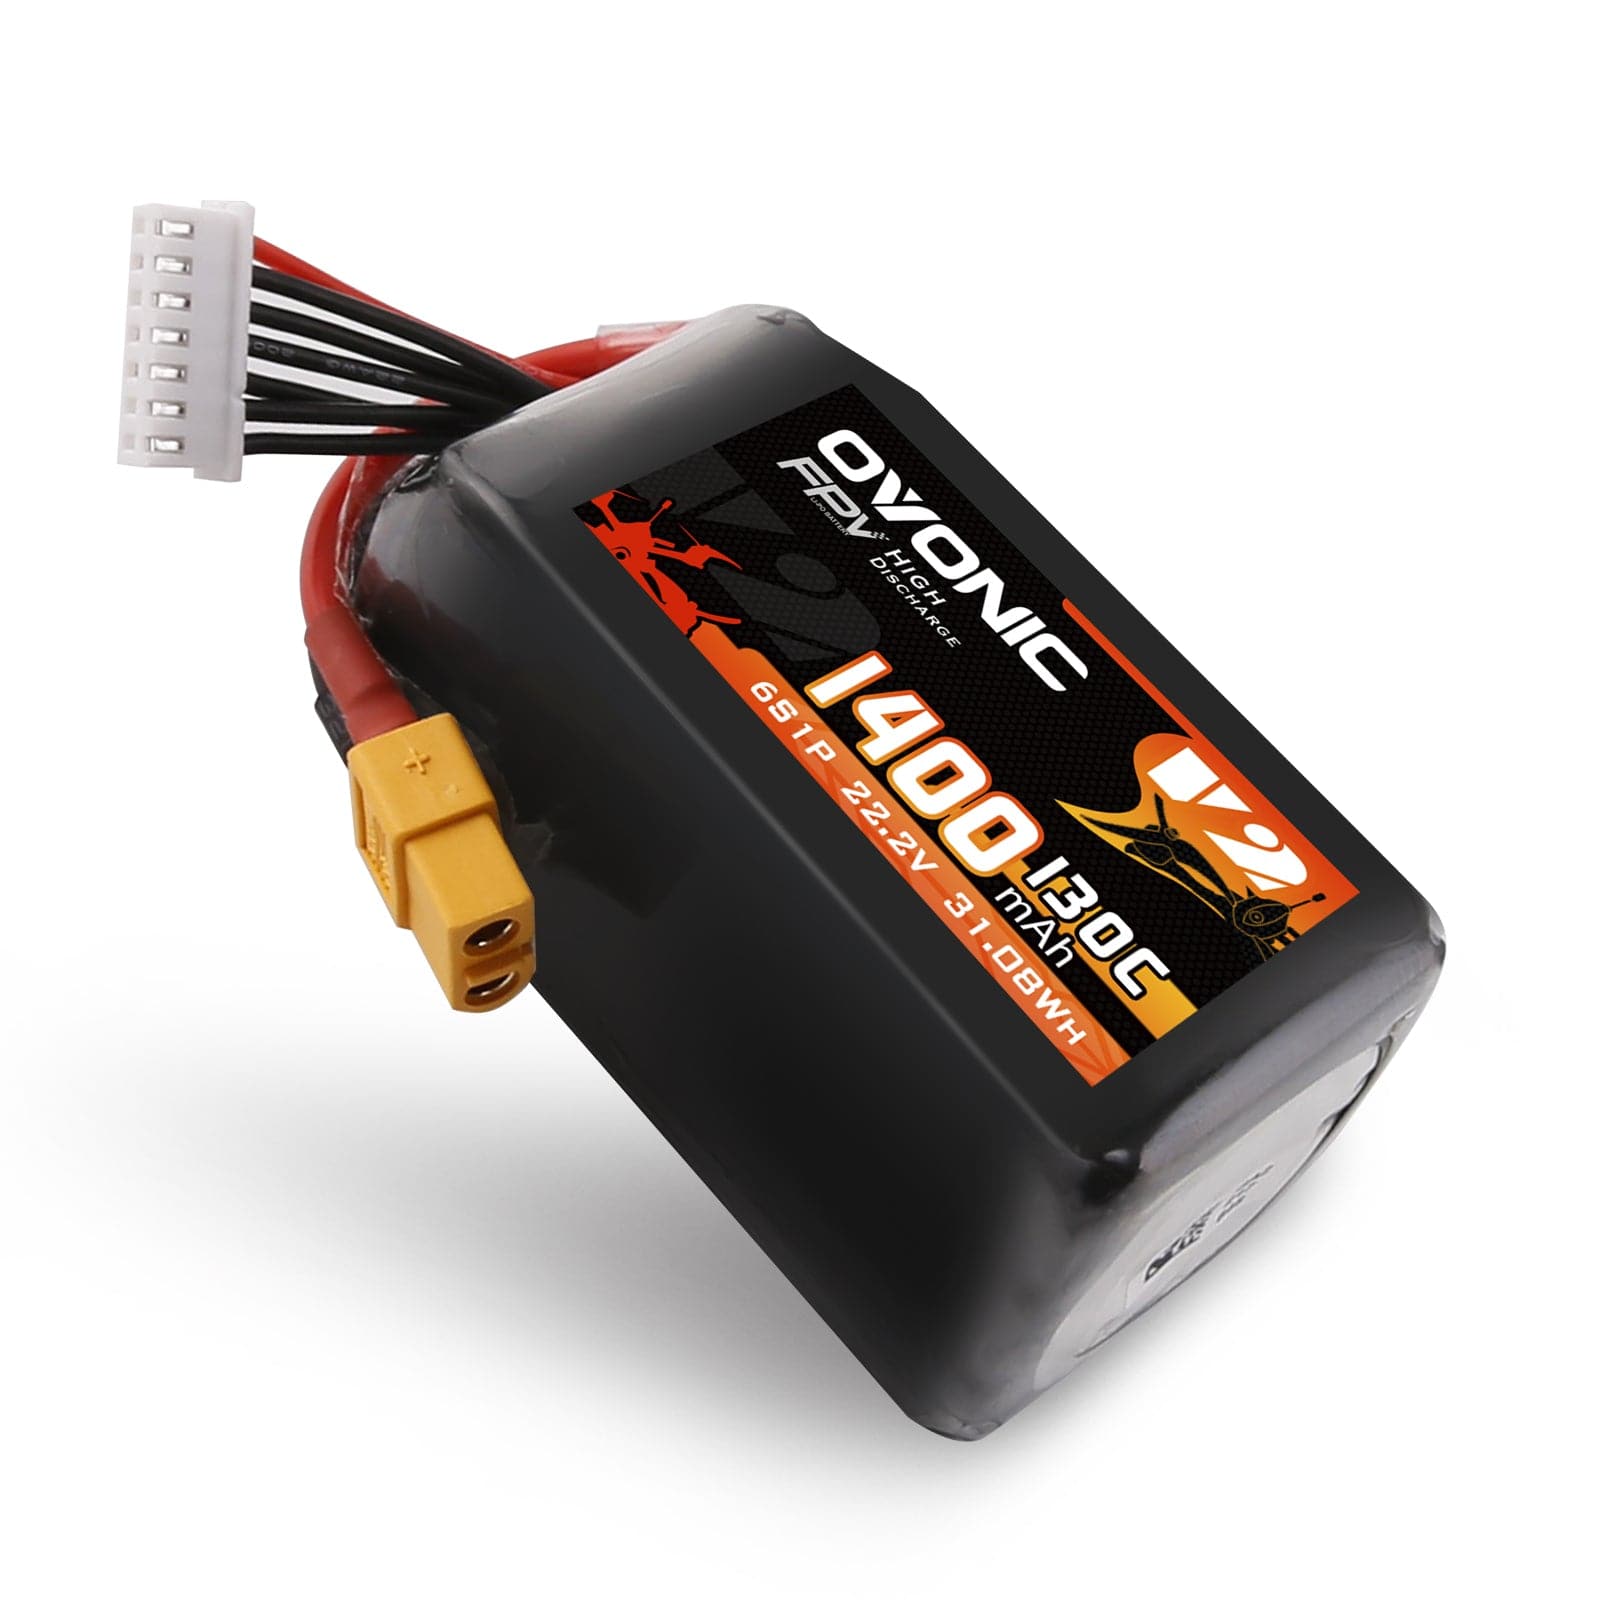 2x Ovonic 130C 6S 1400mah Lipo Battery 22.2V Pack with XT60 Plug for fpv drone